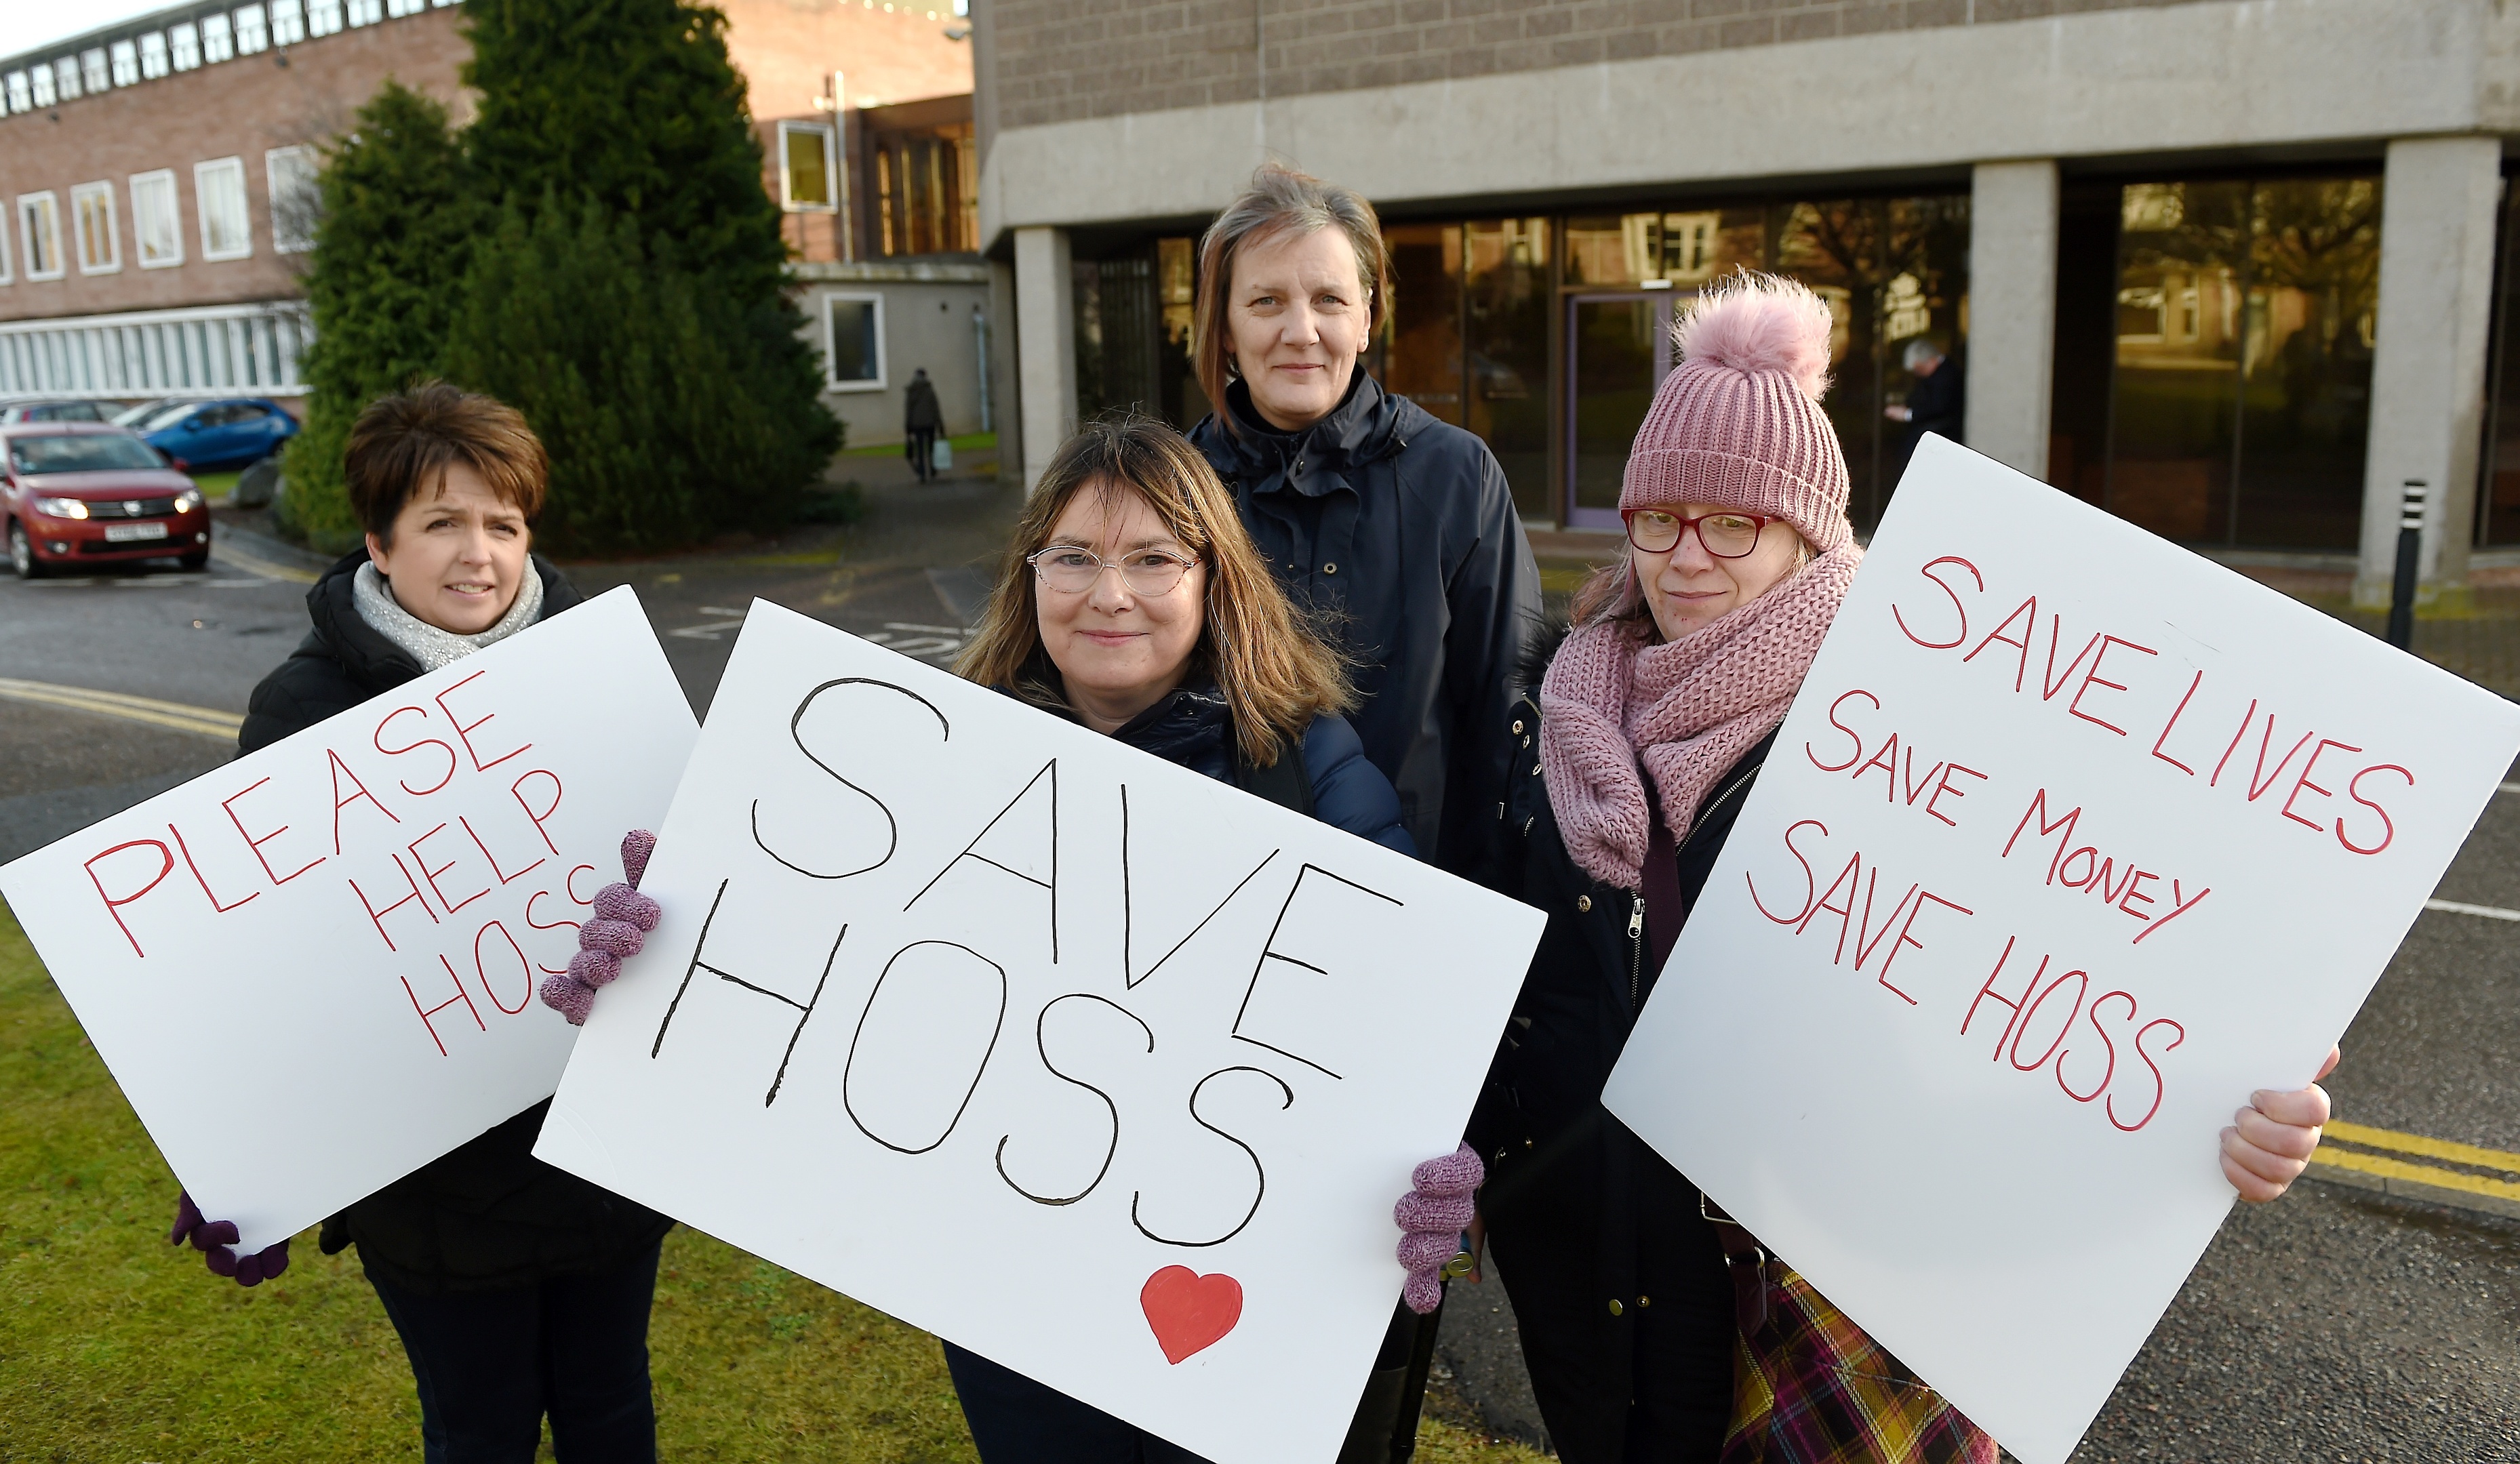 Supporters of HOSS (Highland One Stop Shop) (L-R) Mandy MacRae, Kim Corbett, Barbara Irvine and Tracey Cleary protest about their plight.
Picture by Sandy McCook.